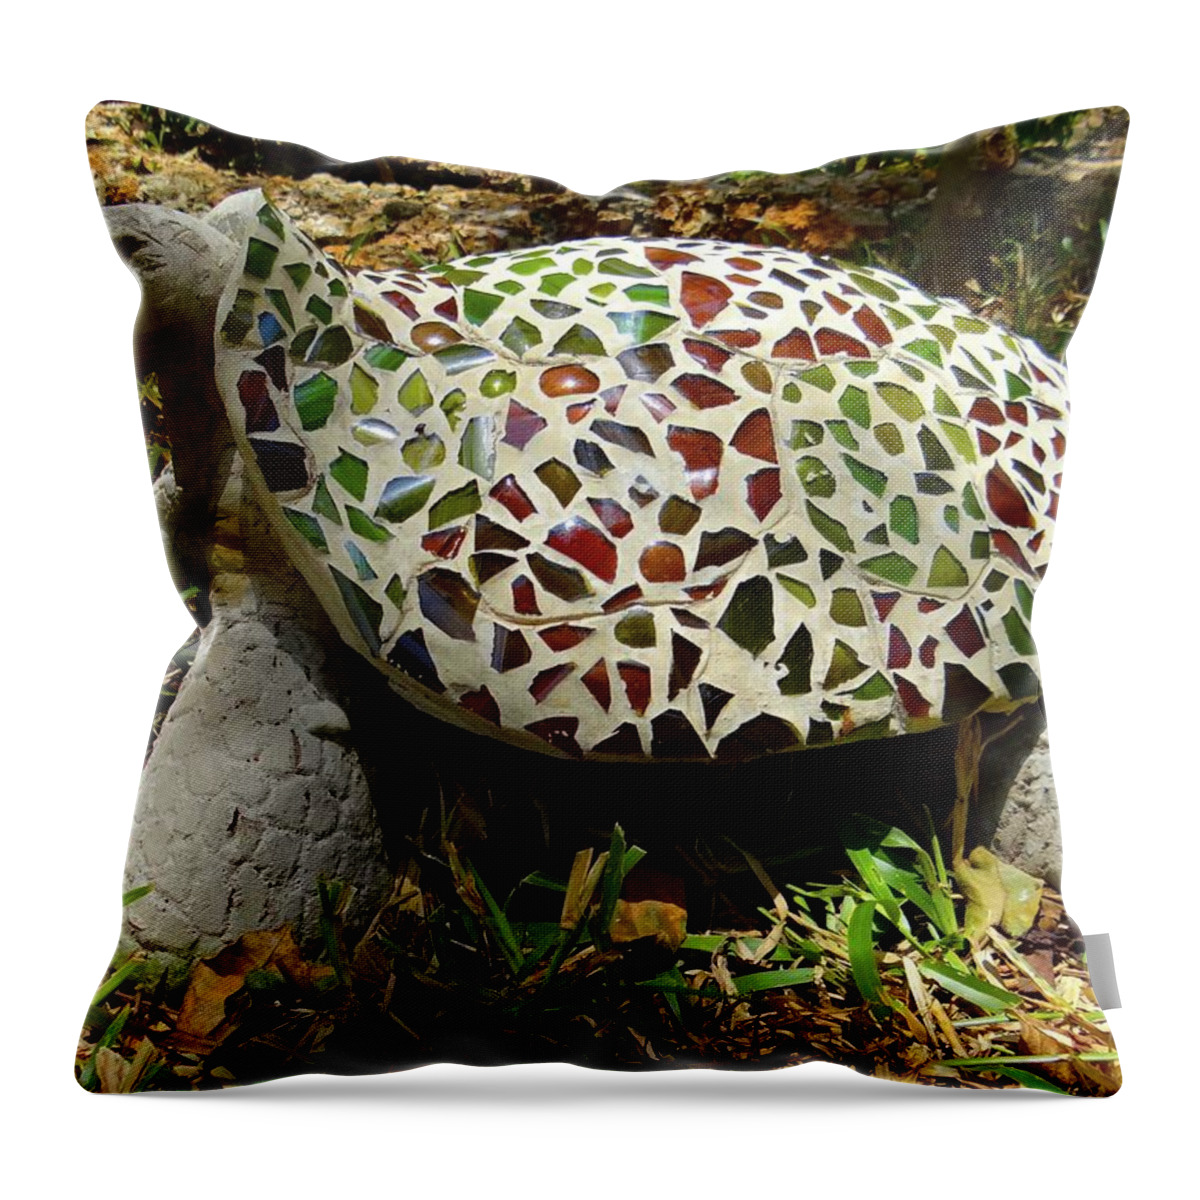 Exploramum Throw Pillow featuring the photograph Mosaic and beer bottle glass turtle by Exploramum Exploramum